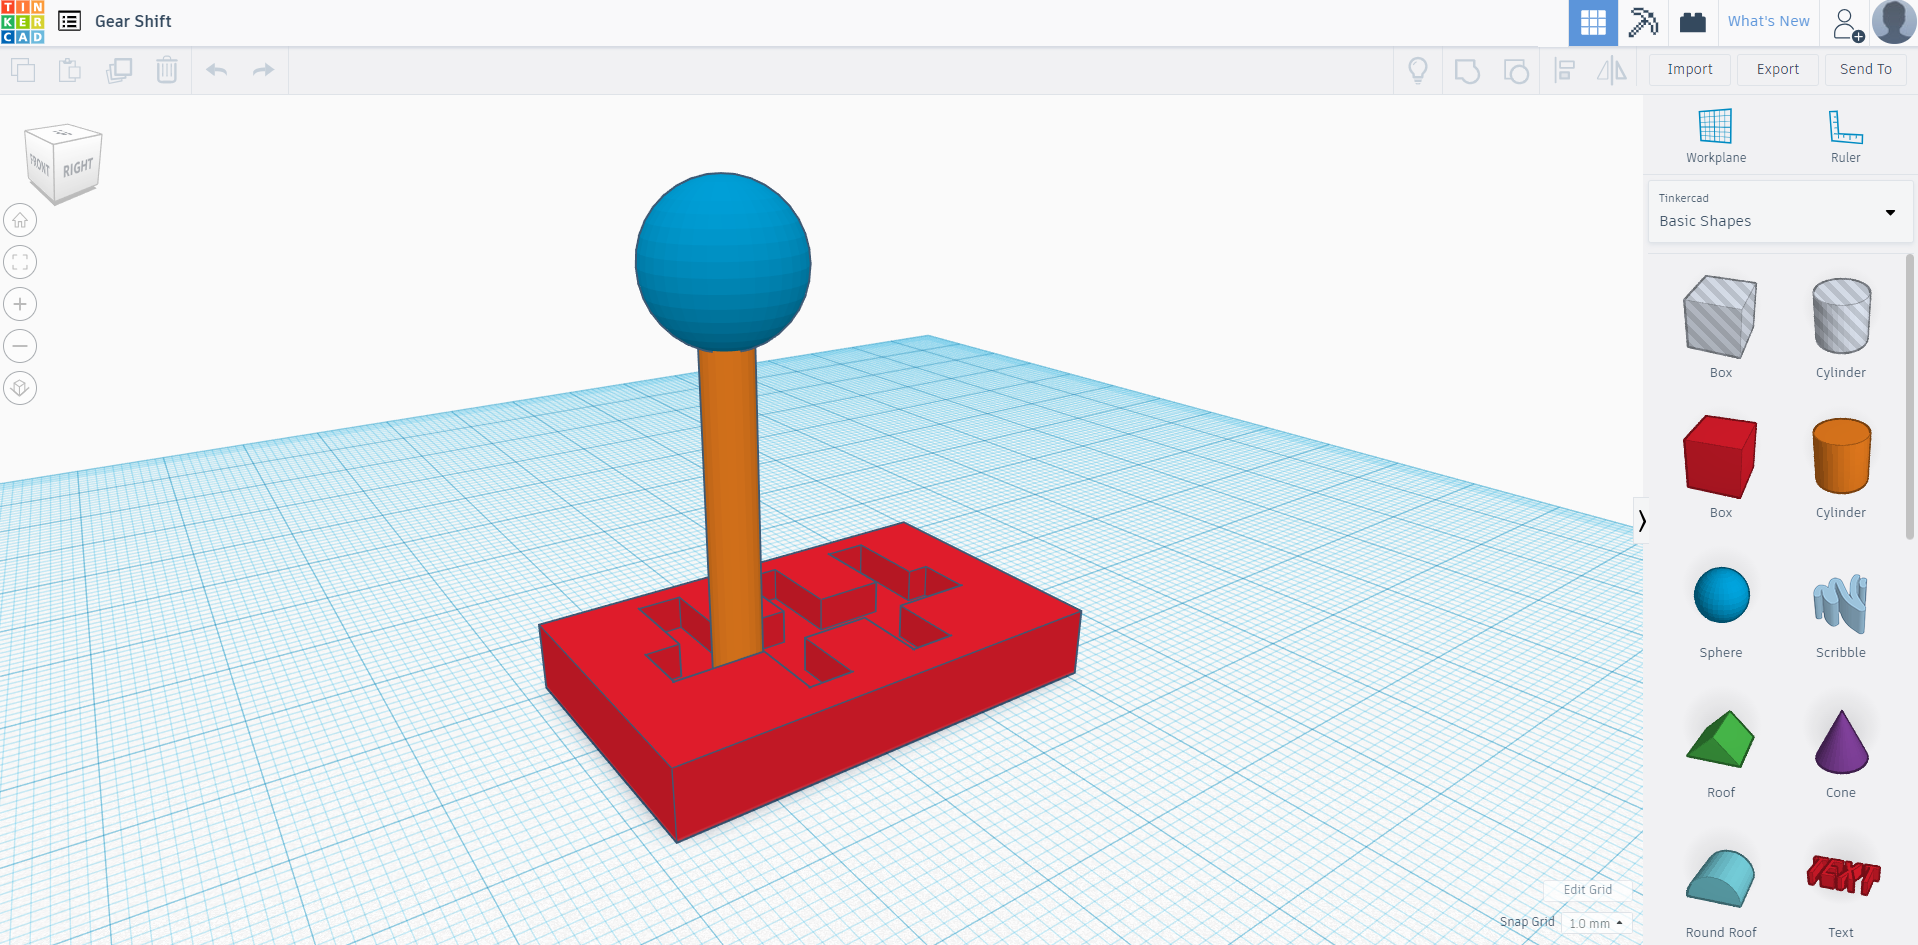 Gear Shift in Tinkercad | Master Of Animation, Games & Interactivity